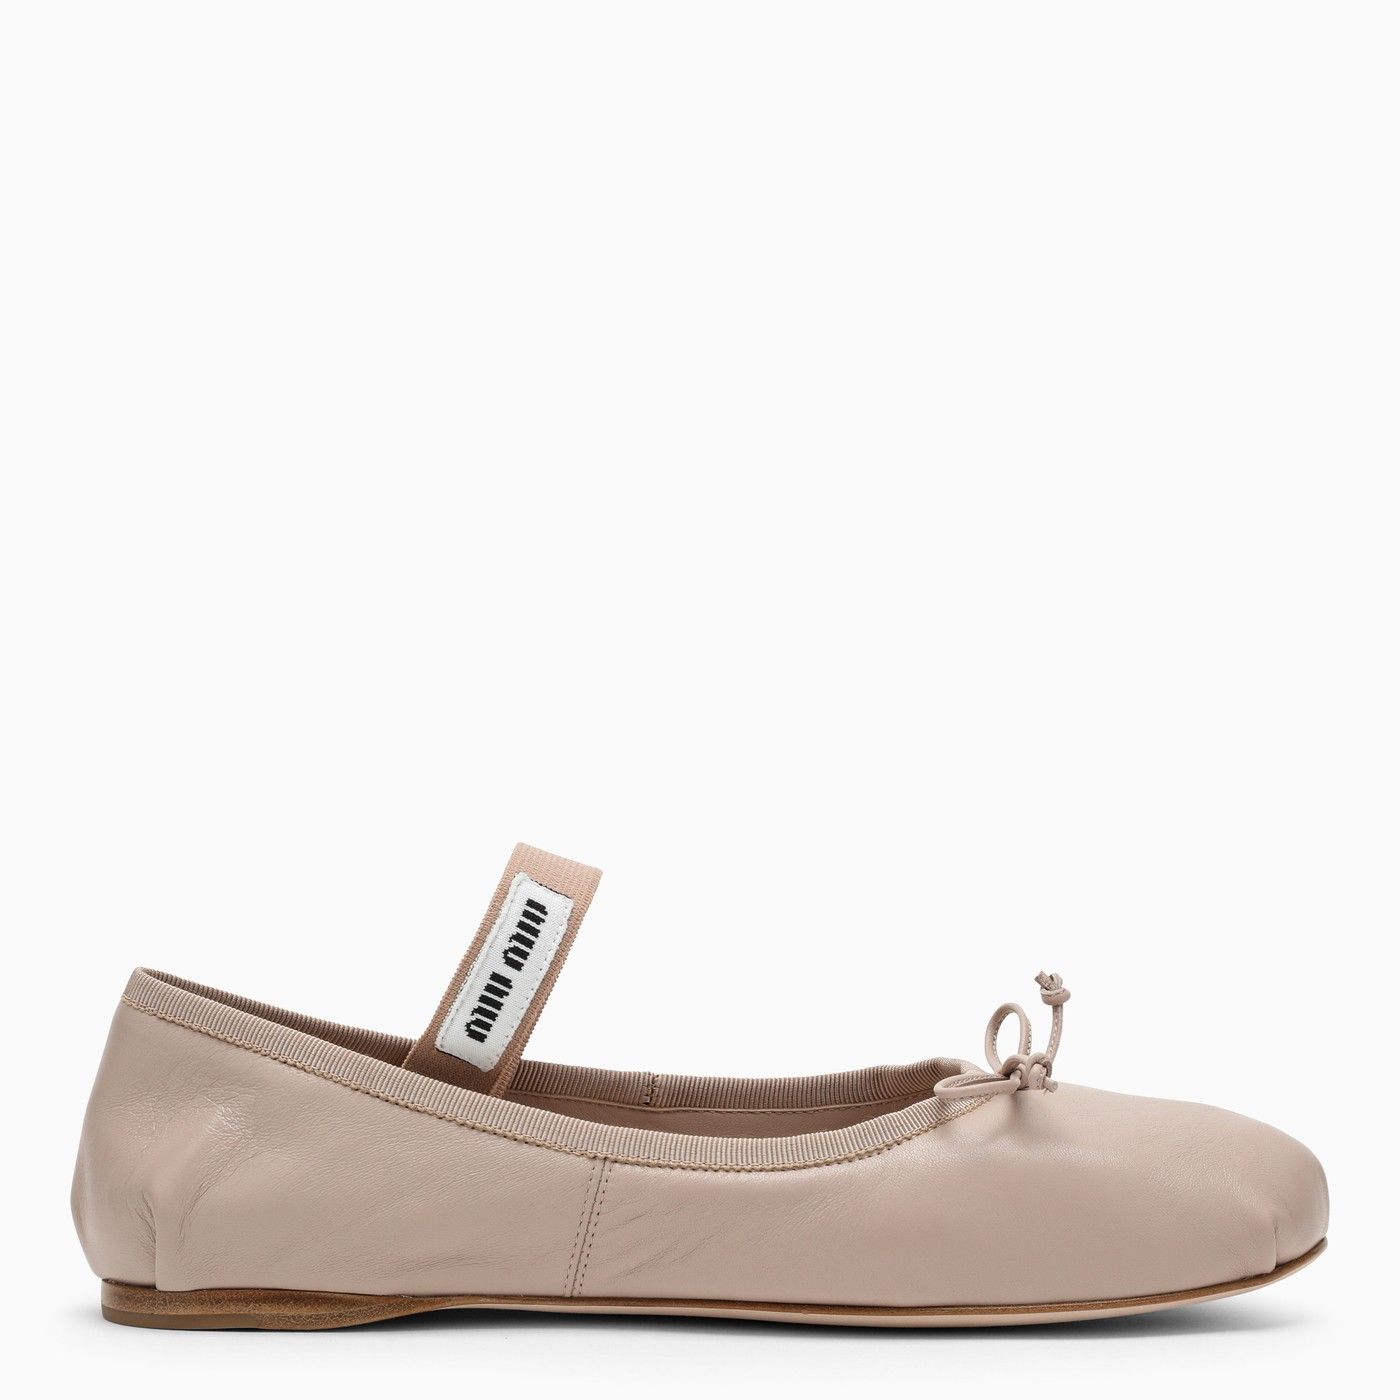 Nude leather ballerinas | The Double F